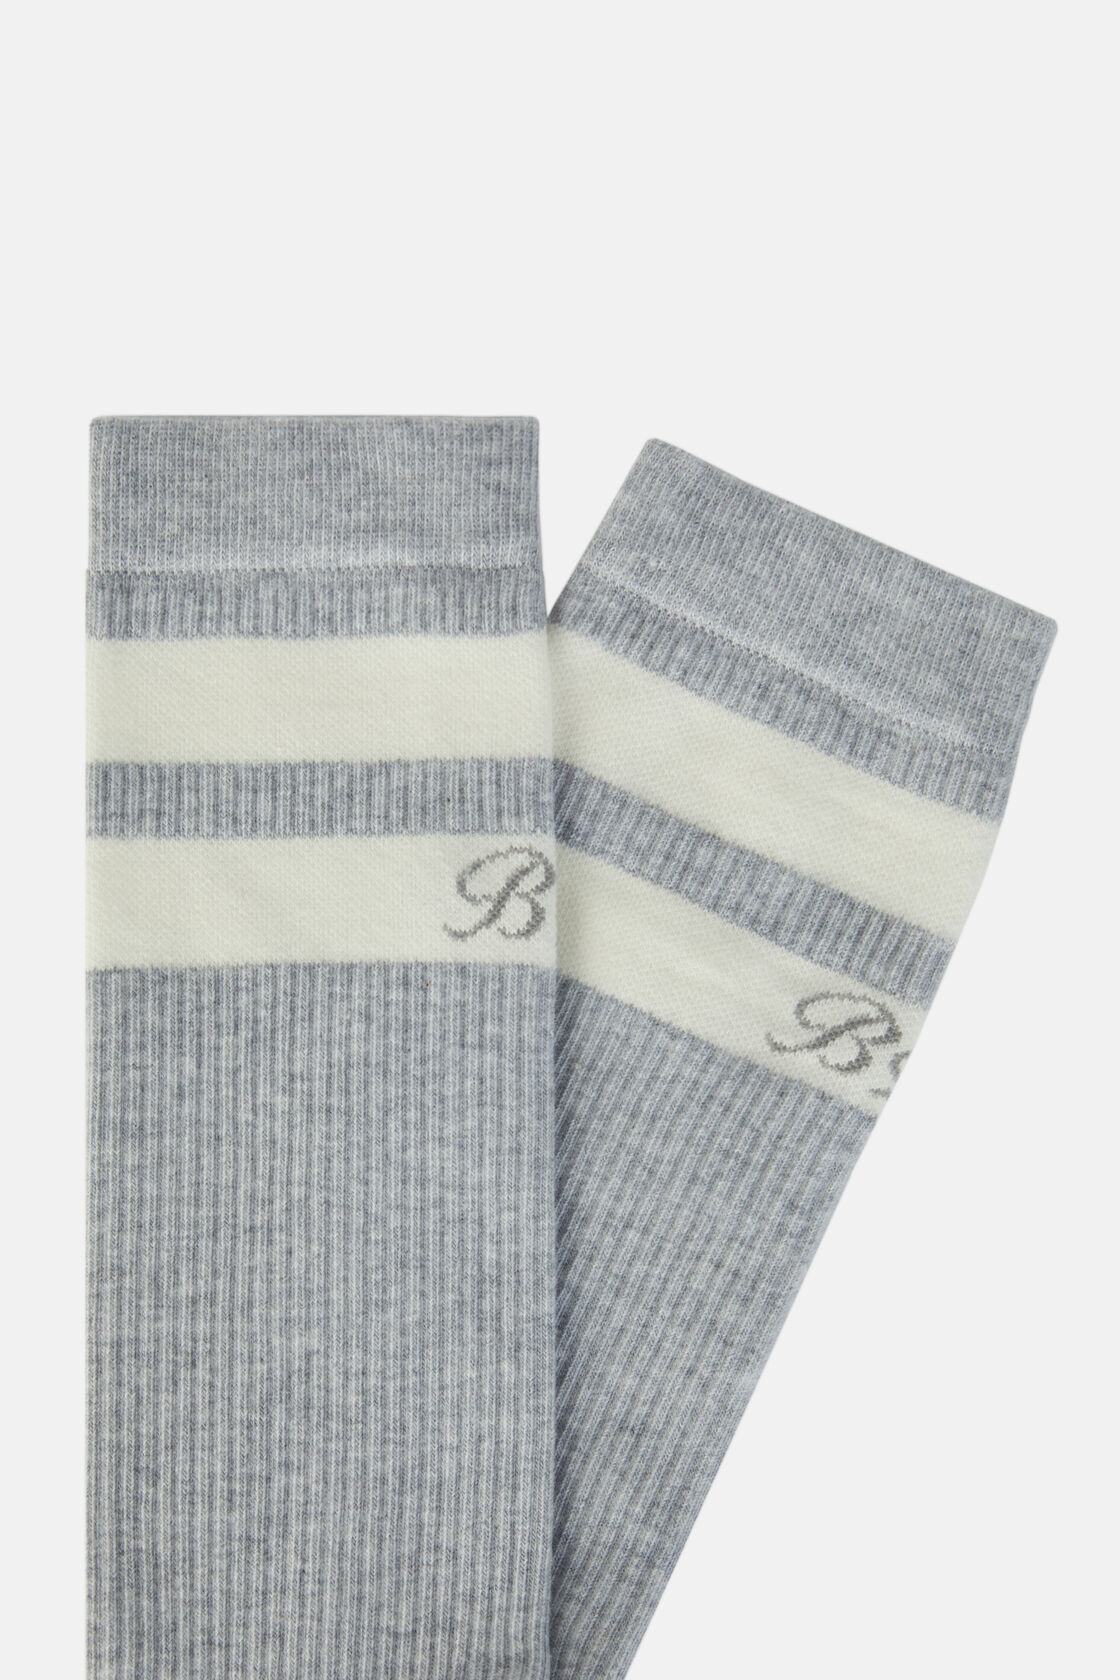 Double Striped Socks in a Cotton Blend, Grey, hi-res